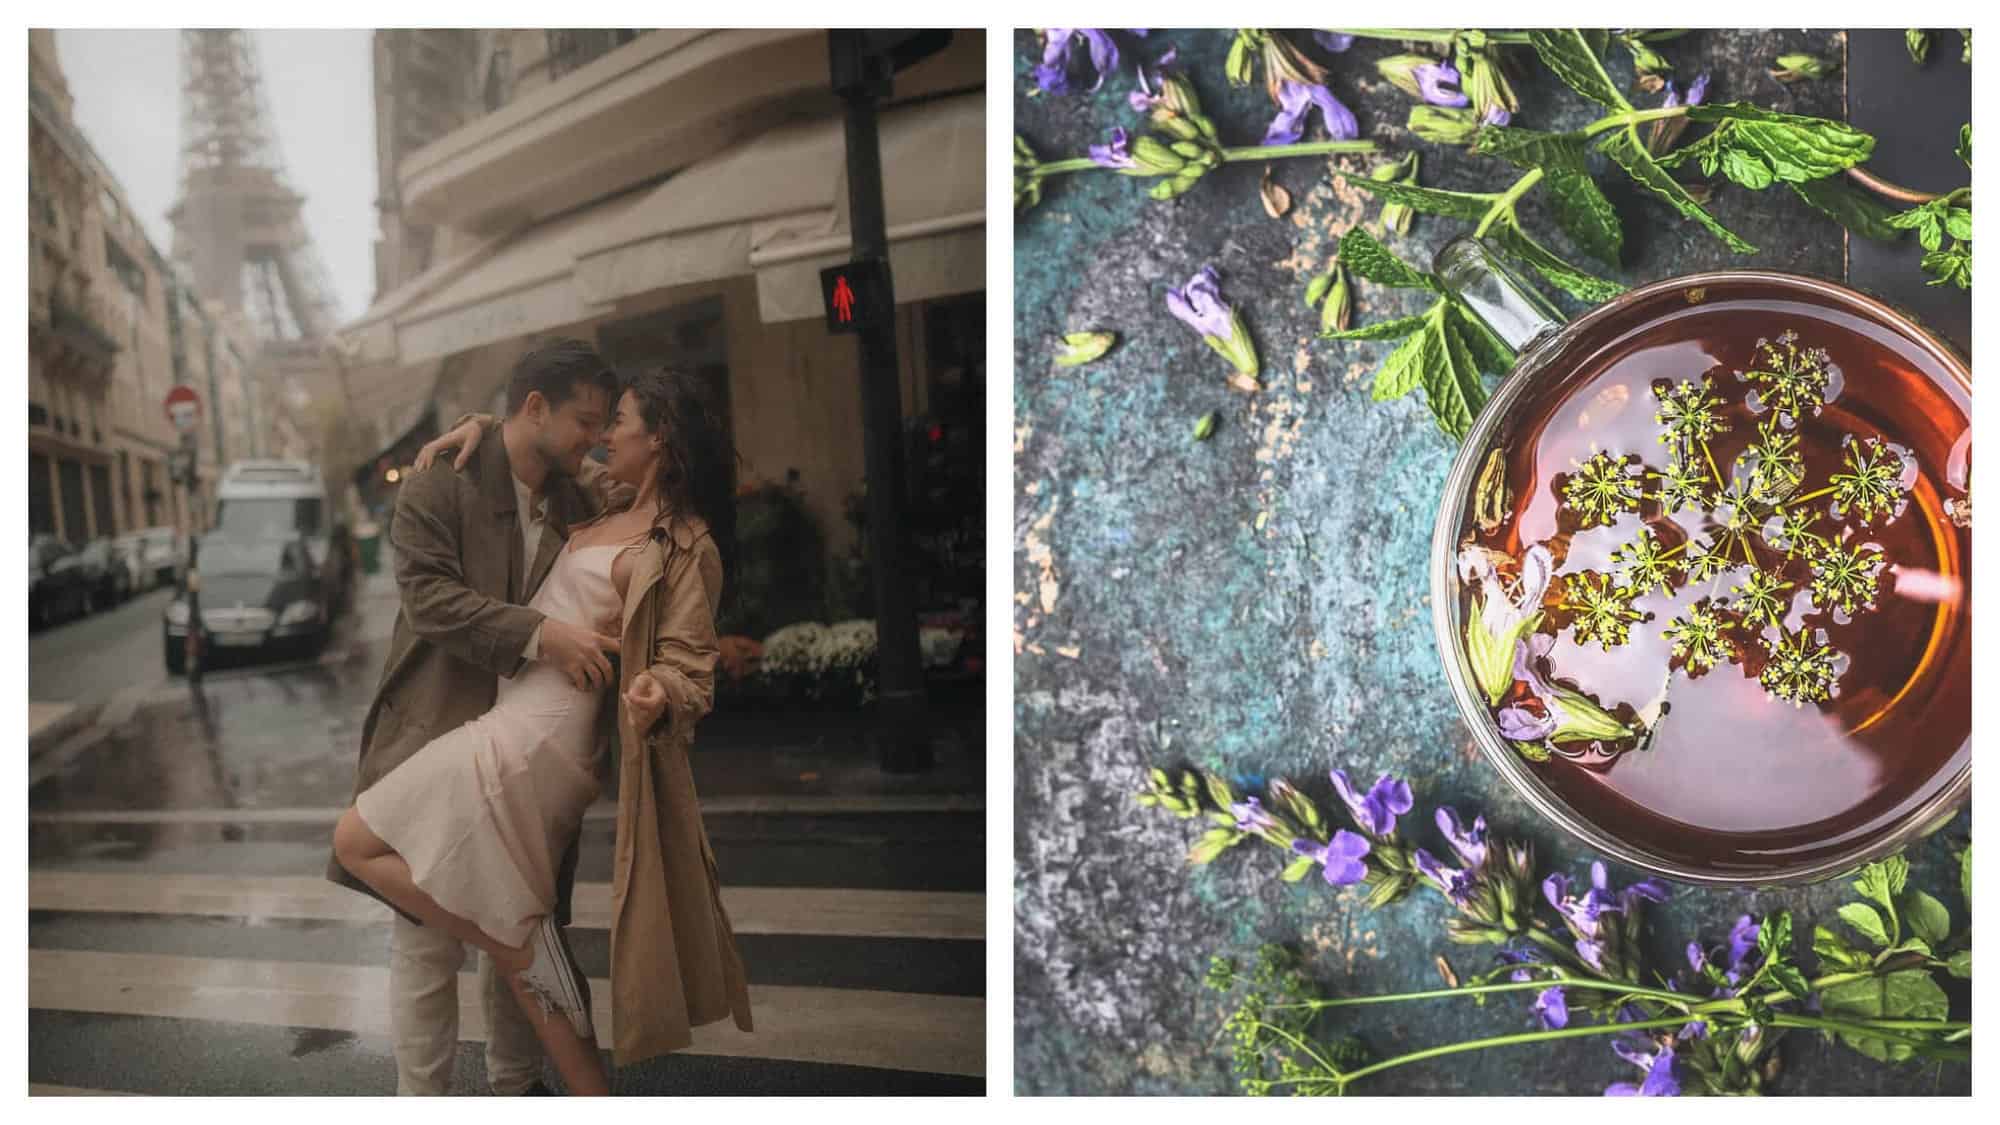 Left: A man and woman are standing in the rain in the middle of a Parisian street, embracing. / Right: A cup of tea is resting on top of a surface, with small flowers around and in the tea.